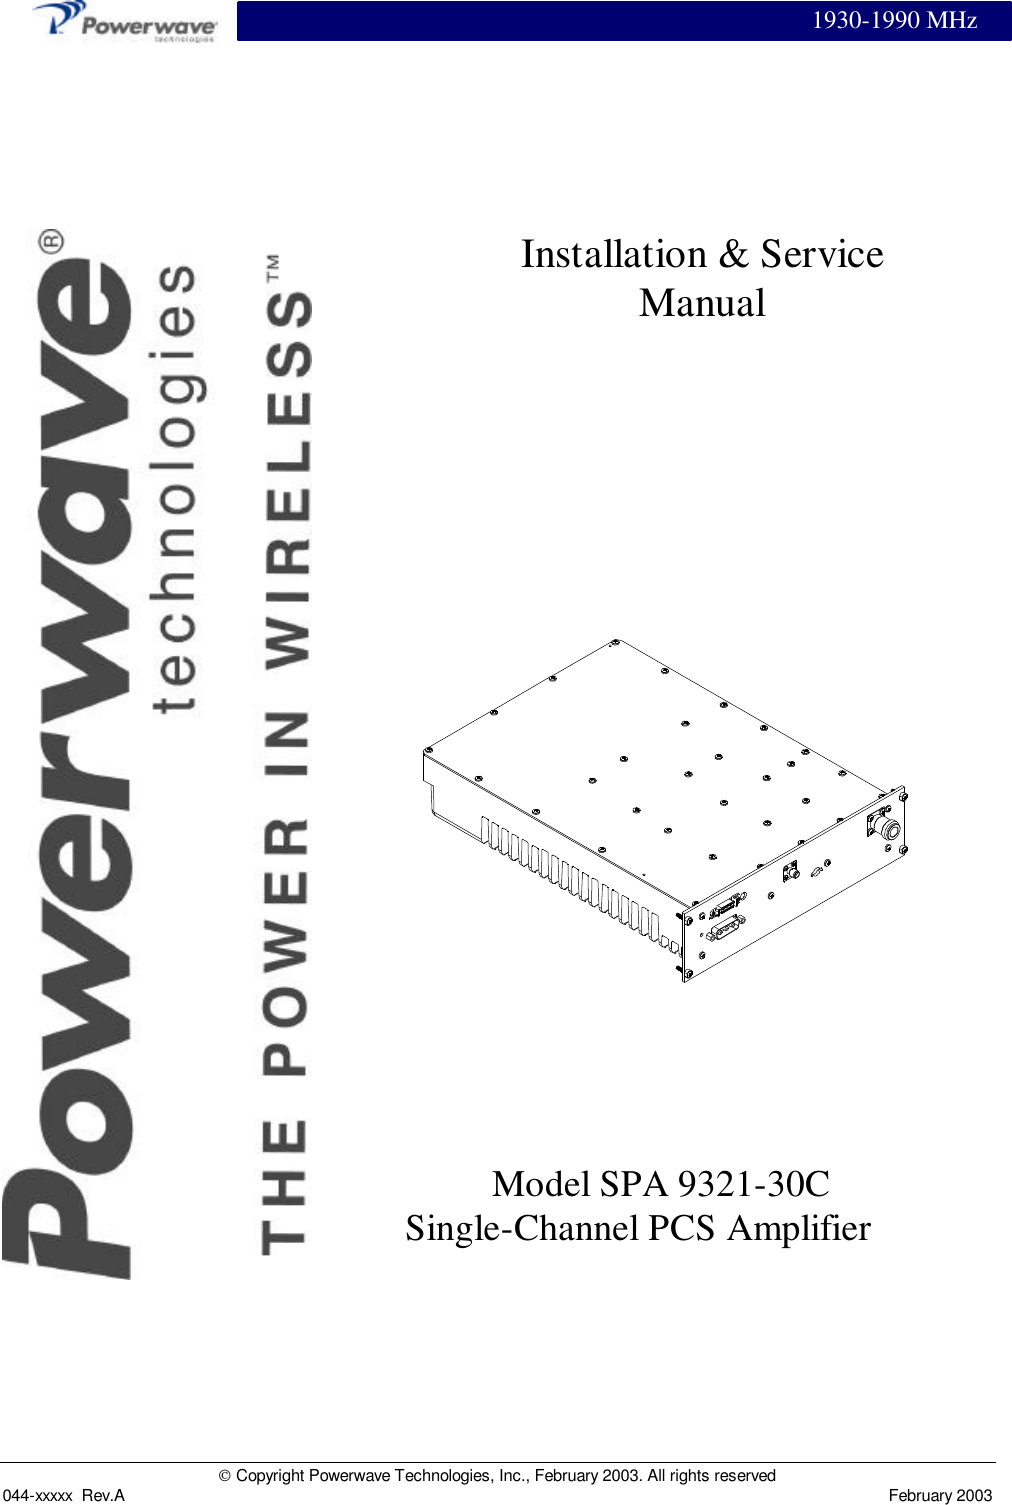 1930-1990 MHz Copyright Powerwave Technologies, Inc., February 2003. All rights reserved044-xxxxx  Rev.A February 2003Model SPA 9321-30C Single-Channel PCS AmplifierInstallation &amp; ServiceManual